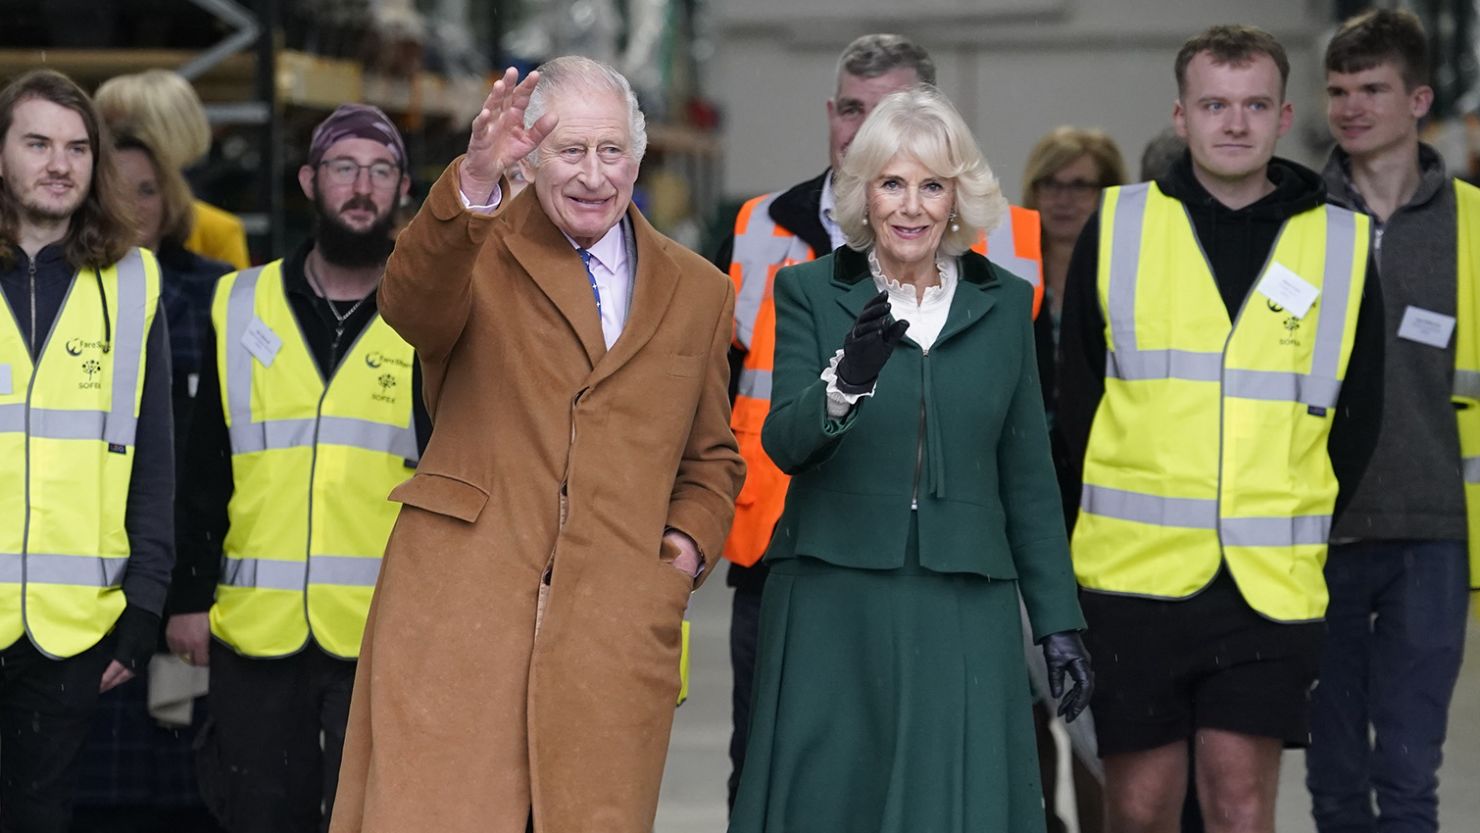 King Charles III and Queen Camilla arrive to mark the King's 75th birthday at the official launch of The Coronation Food Project, which aims to bridge the gap between food waste and food need across all four nations of the United Kingdom, at the South Oxfordshire Food and Education Alliance (SOFEA) surplus food distribution centre, in Didcot, Oxfordshire. Picture date: Tuesday November 14, 2023. (Photo by Andrew Matthews/PA Images via Getty Images)